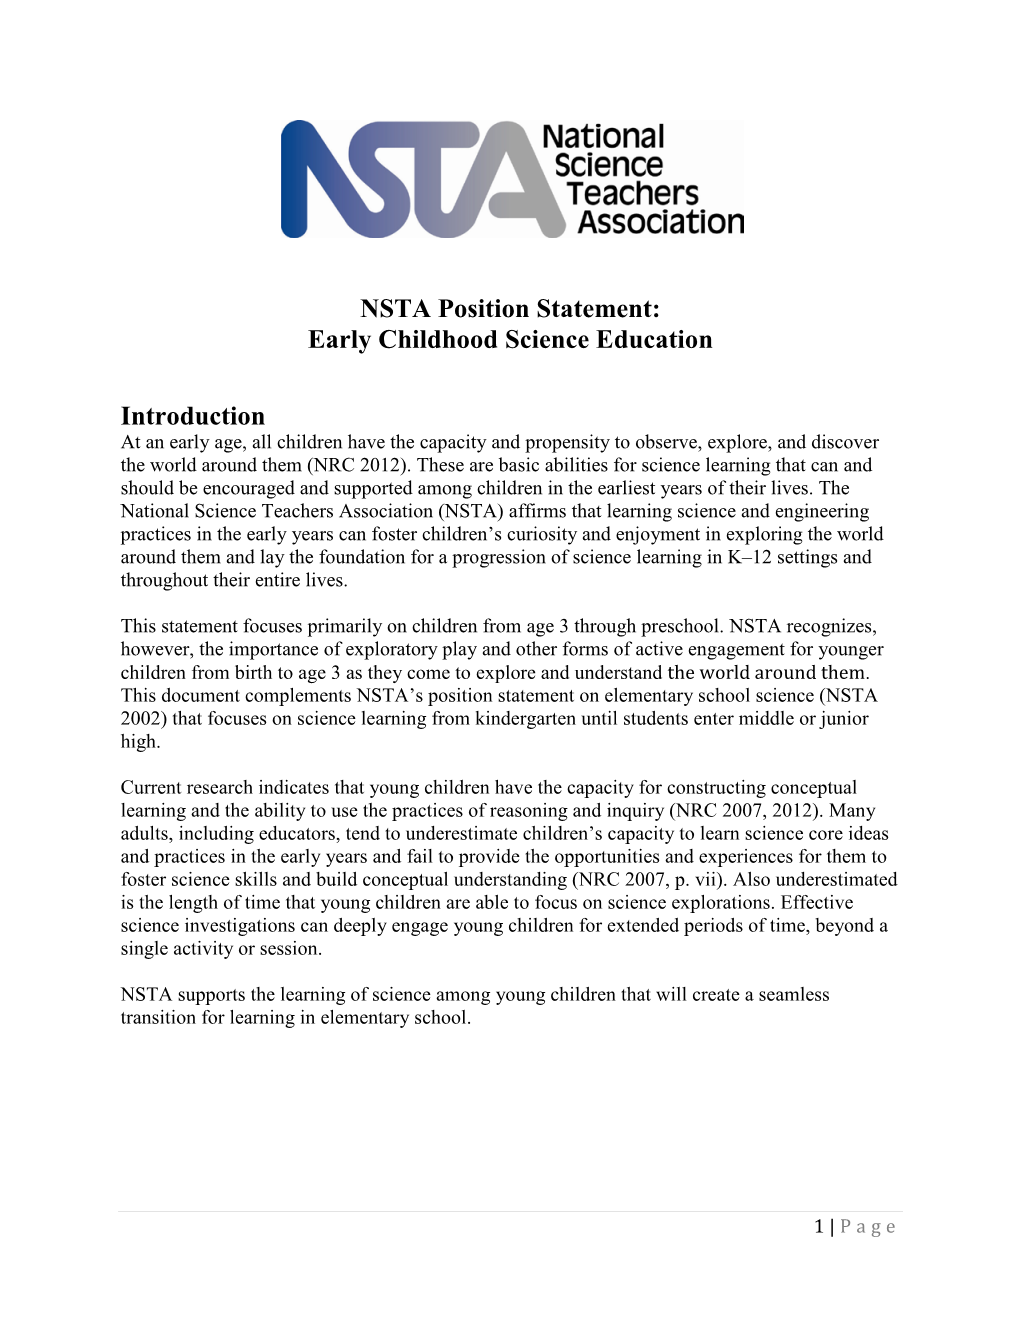 NSTA Position Statement: Early Childhood Science Education